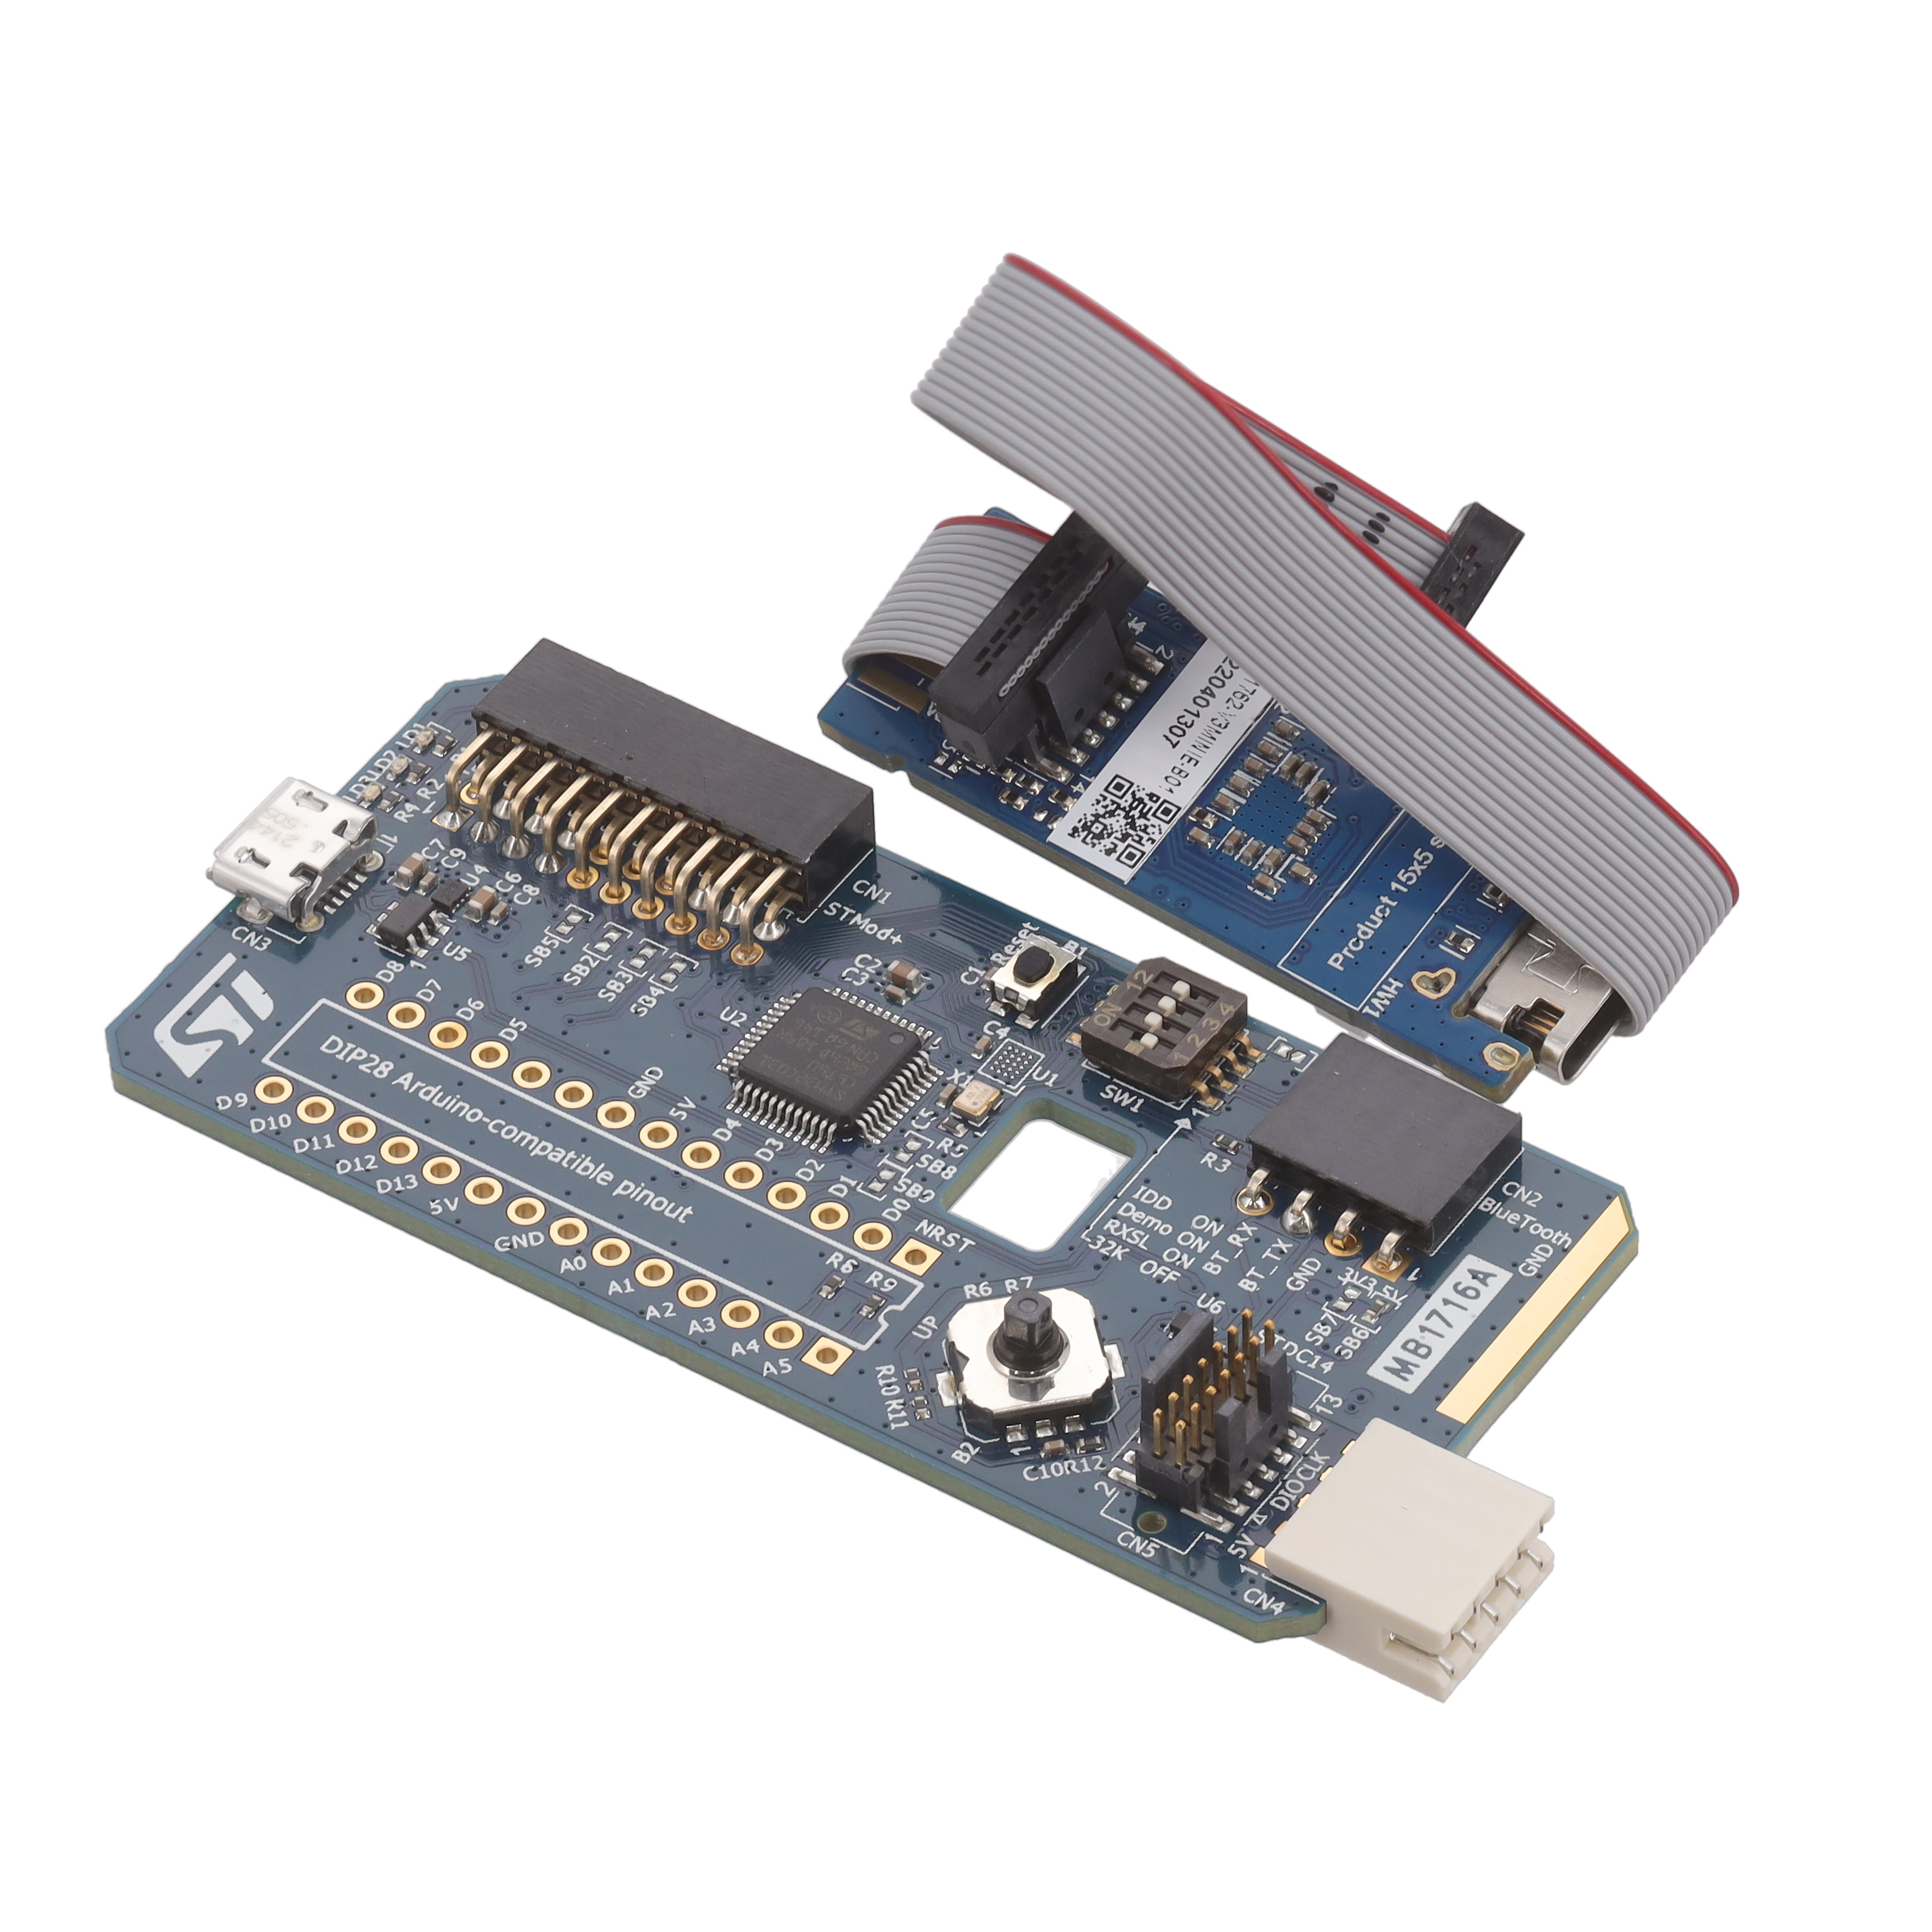 【STM32C0316-DK】DISCOVERY KIT WITH STM32C031C6T6